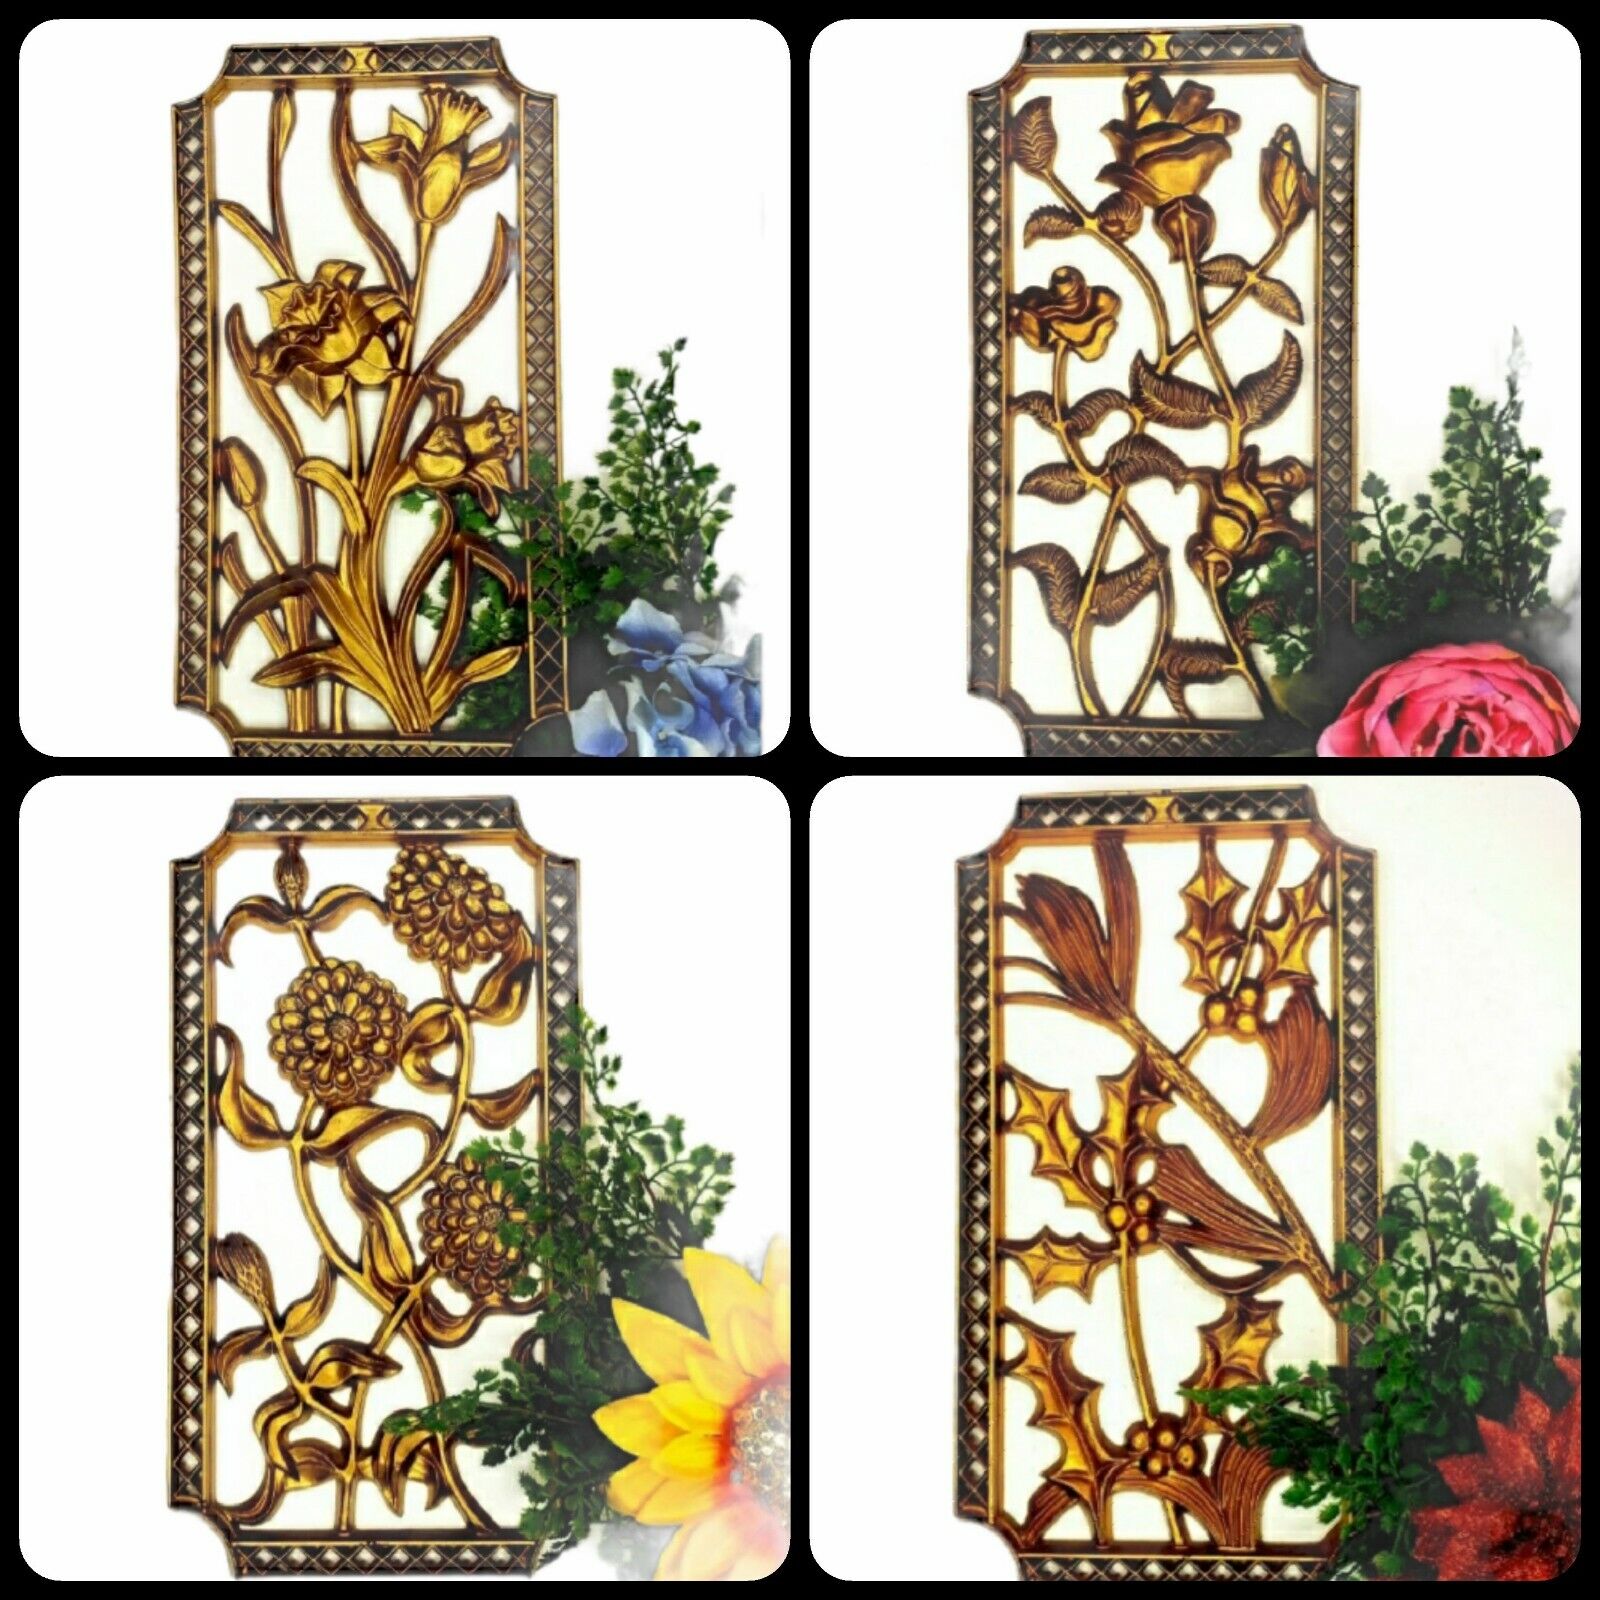 Four Seasons MCM 1950s Wall Art USA Floral Set of 4 Golden RoCoco Plaques